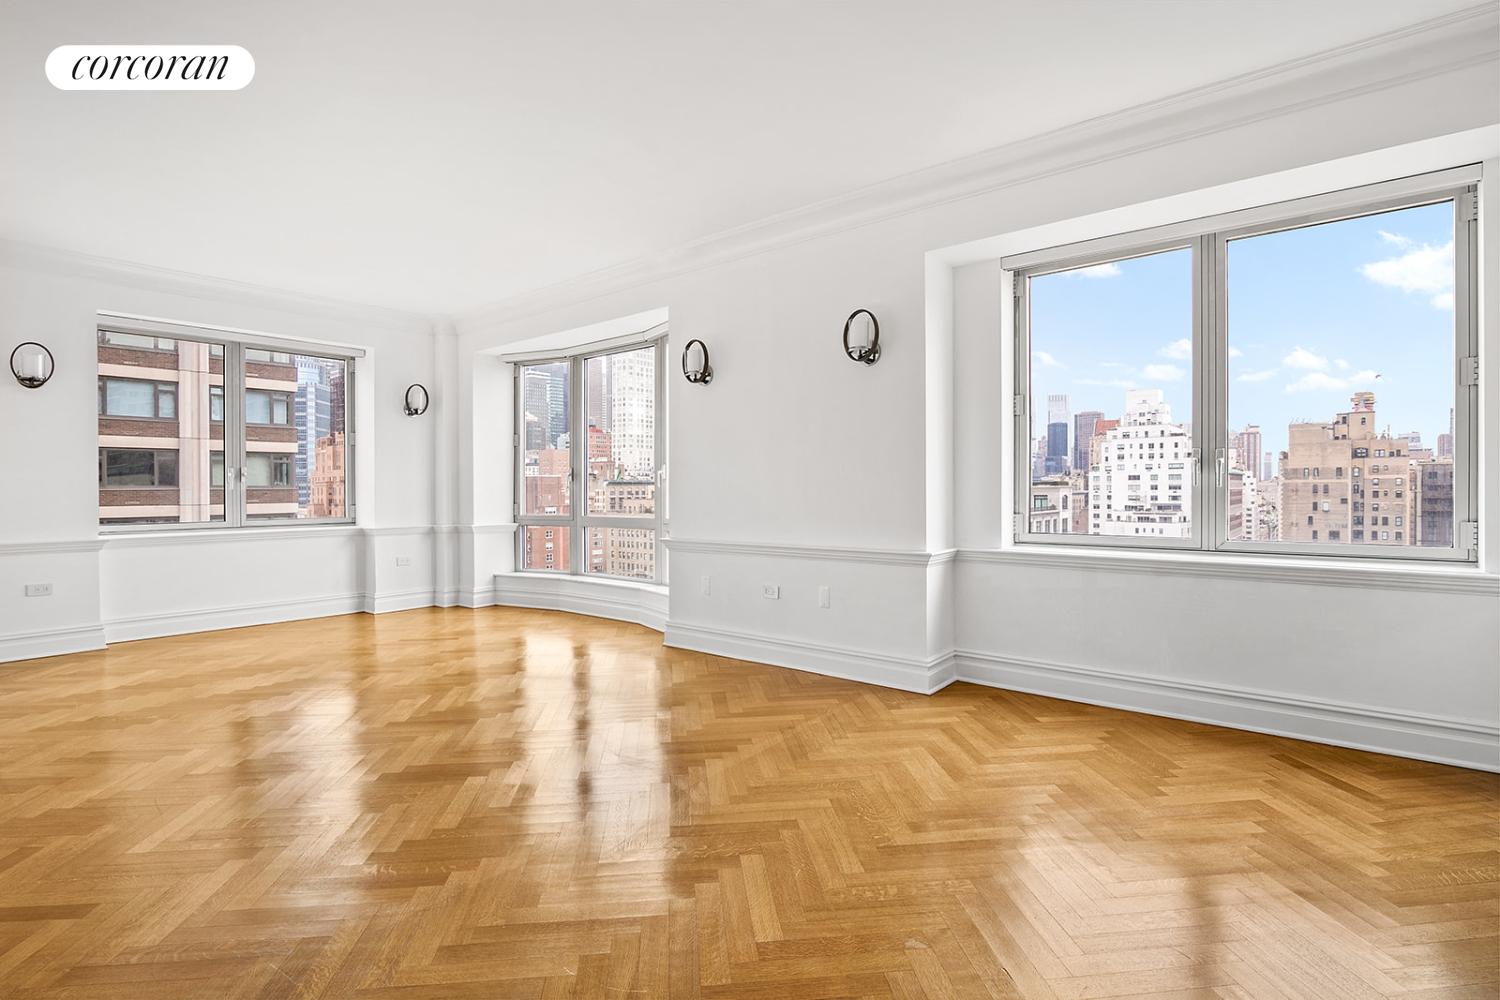 181 East 65th Street 12A, Lenox Hill, Upper East Side, NYC - 2 Bedrooms  
2.5 Bathrooms  
5 Rooms - 